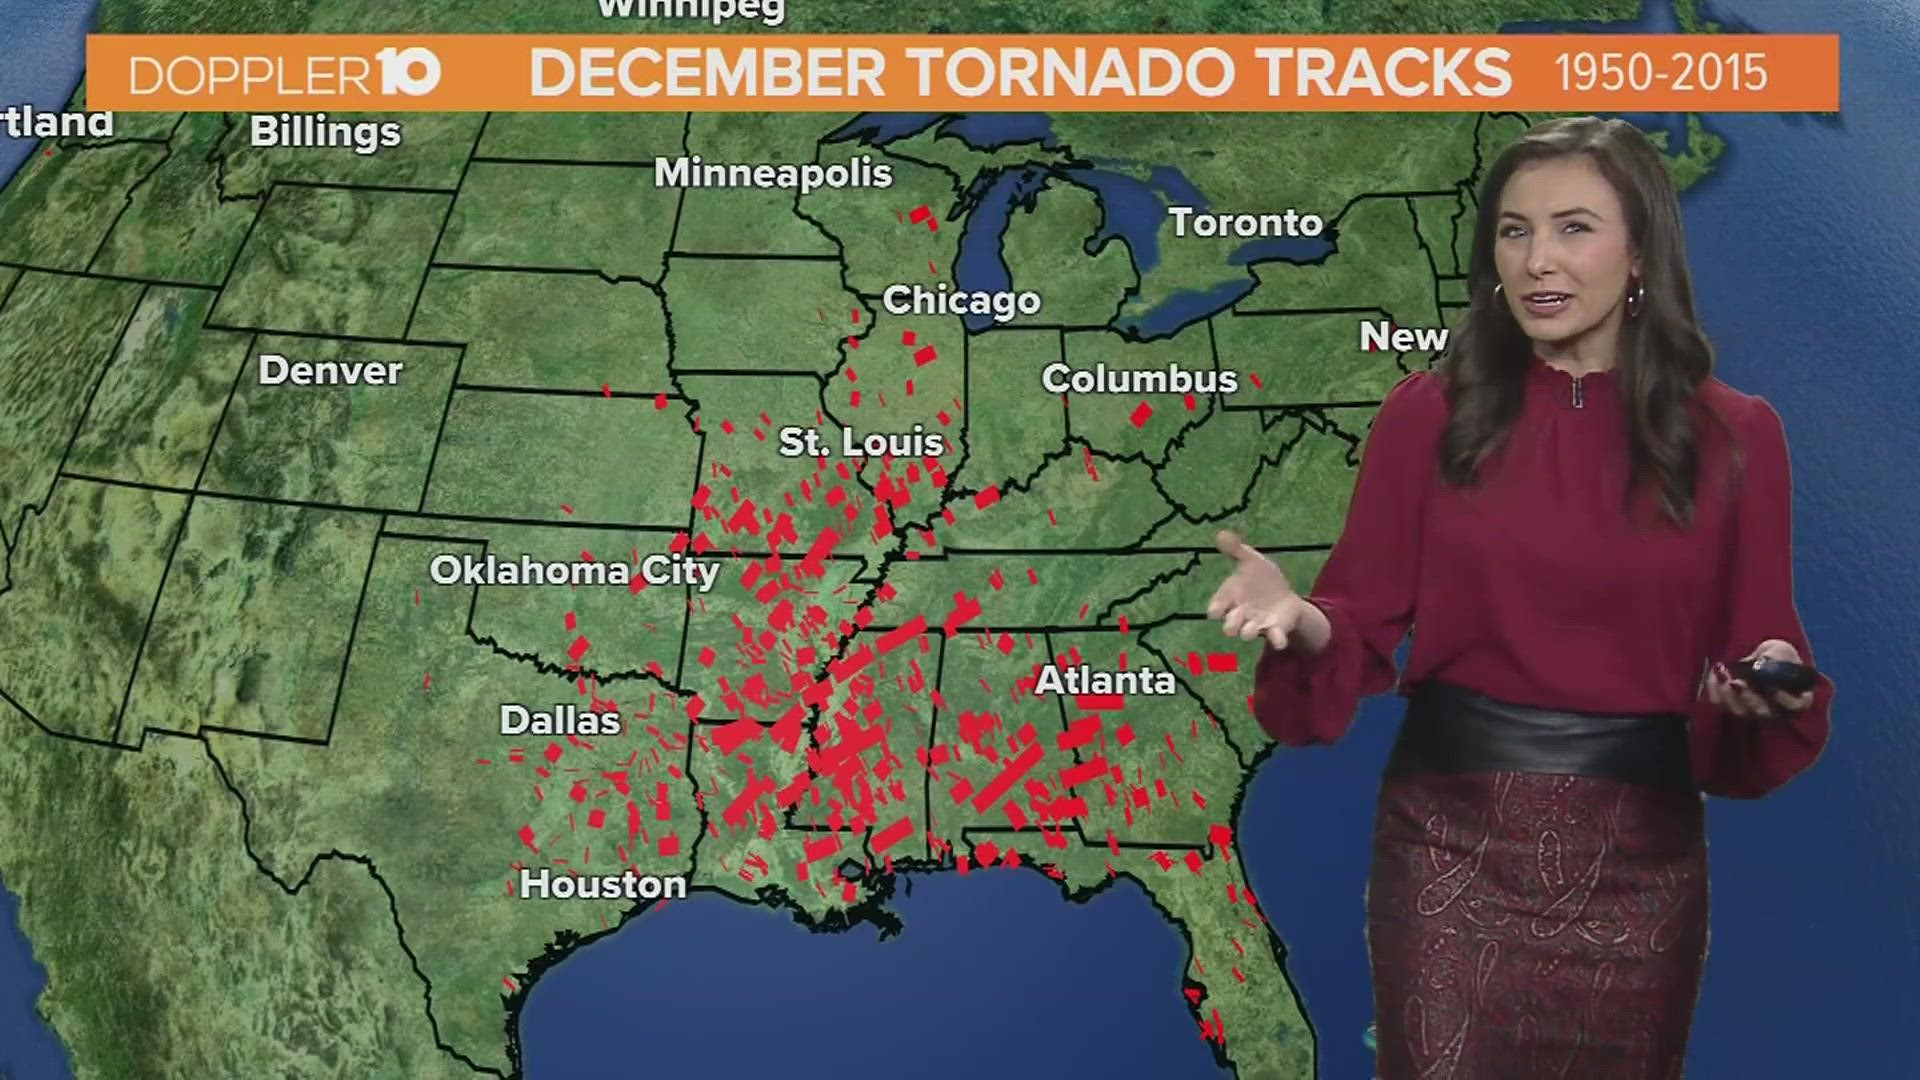 Meteorologists have noticed an increase in the frequency of tornadoes in Ohio in the winter months.